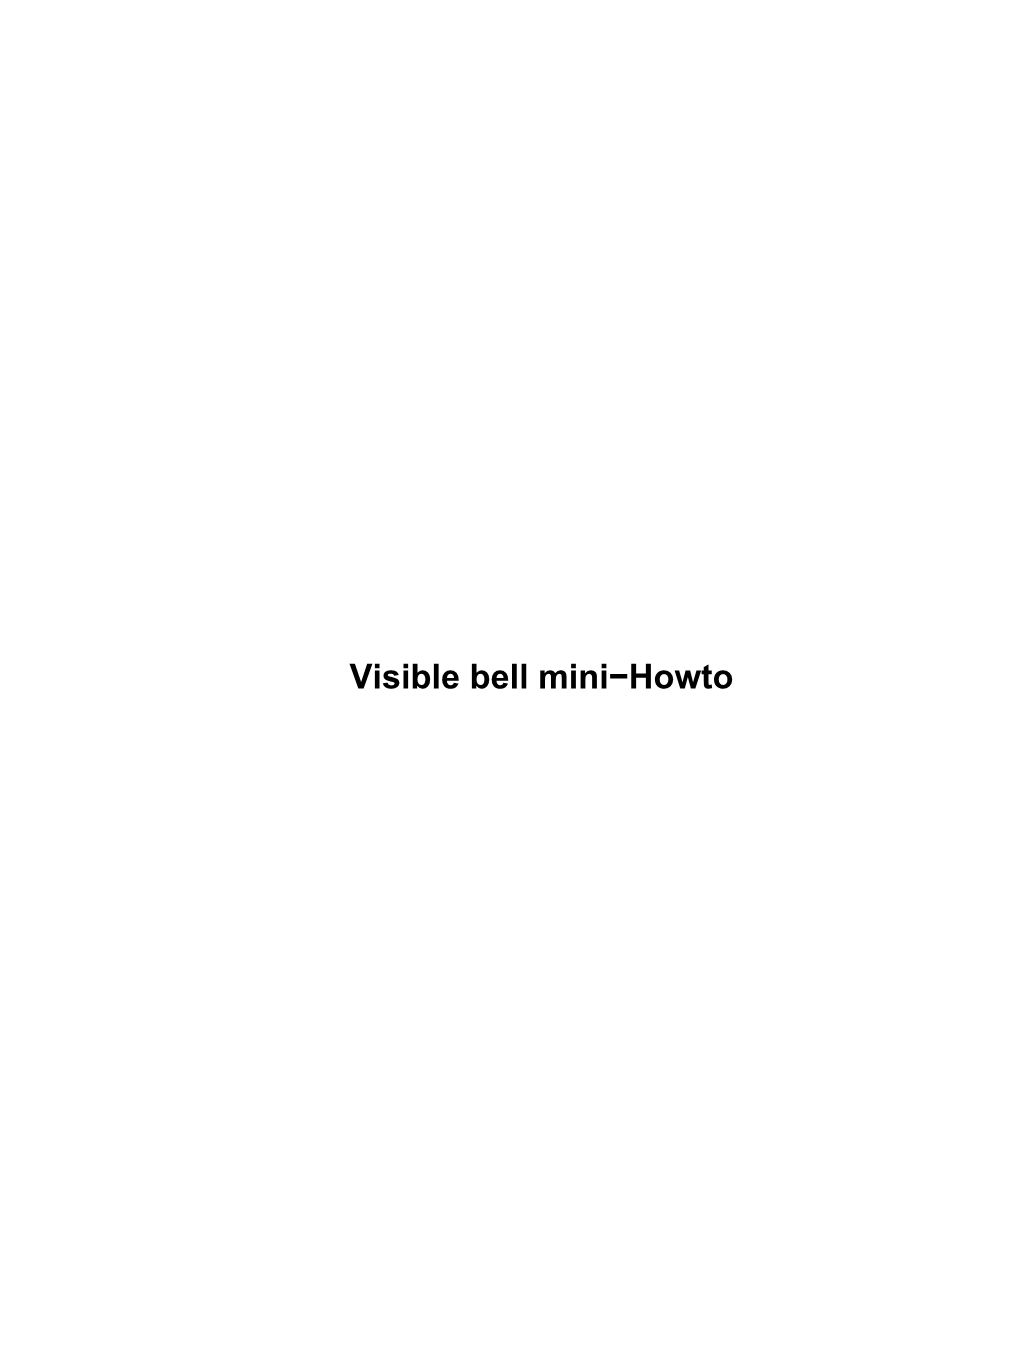 Visible Bell Mini-Howto